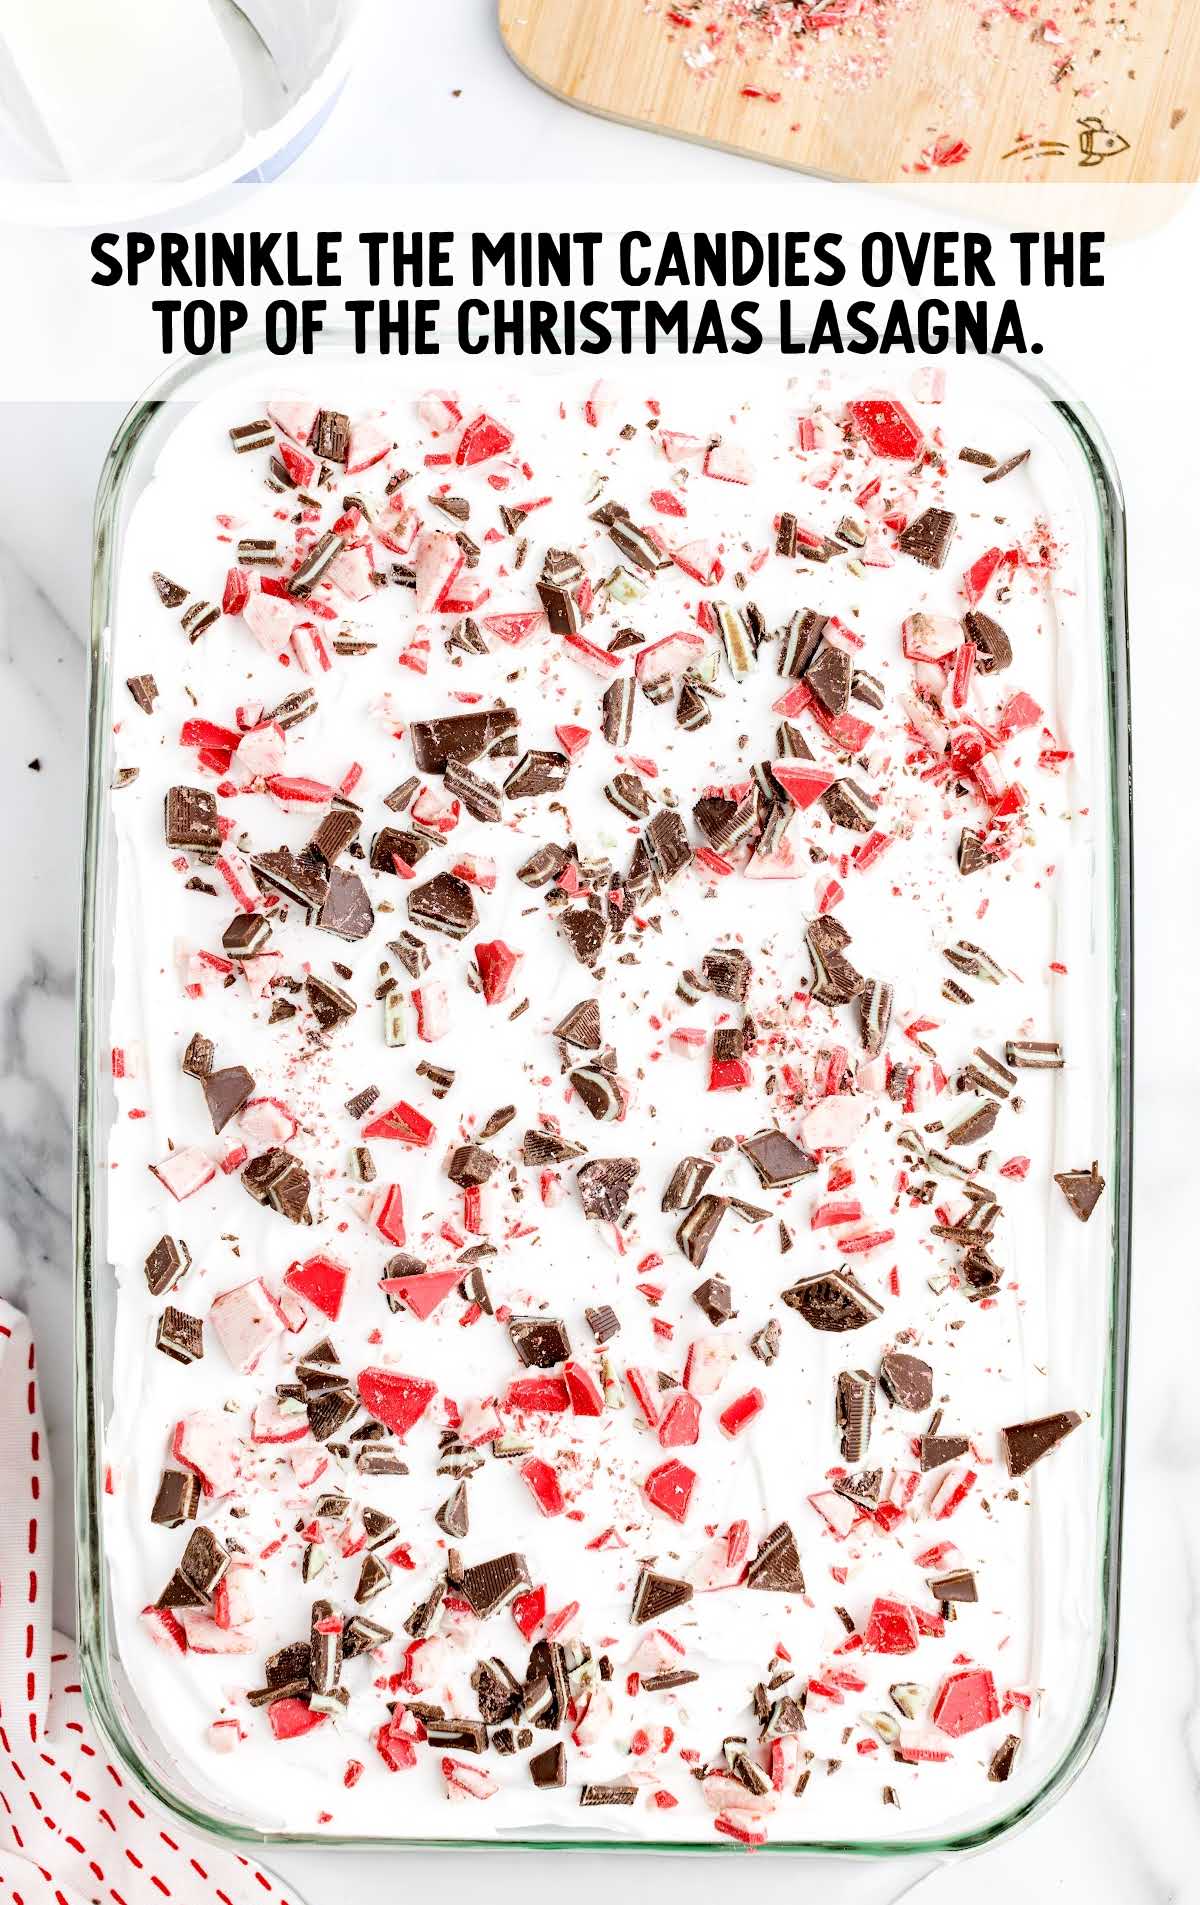 mint candies sprinkled over the lasagna in a baking dish